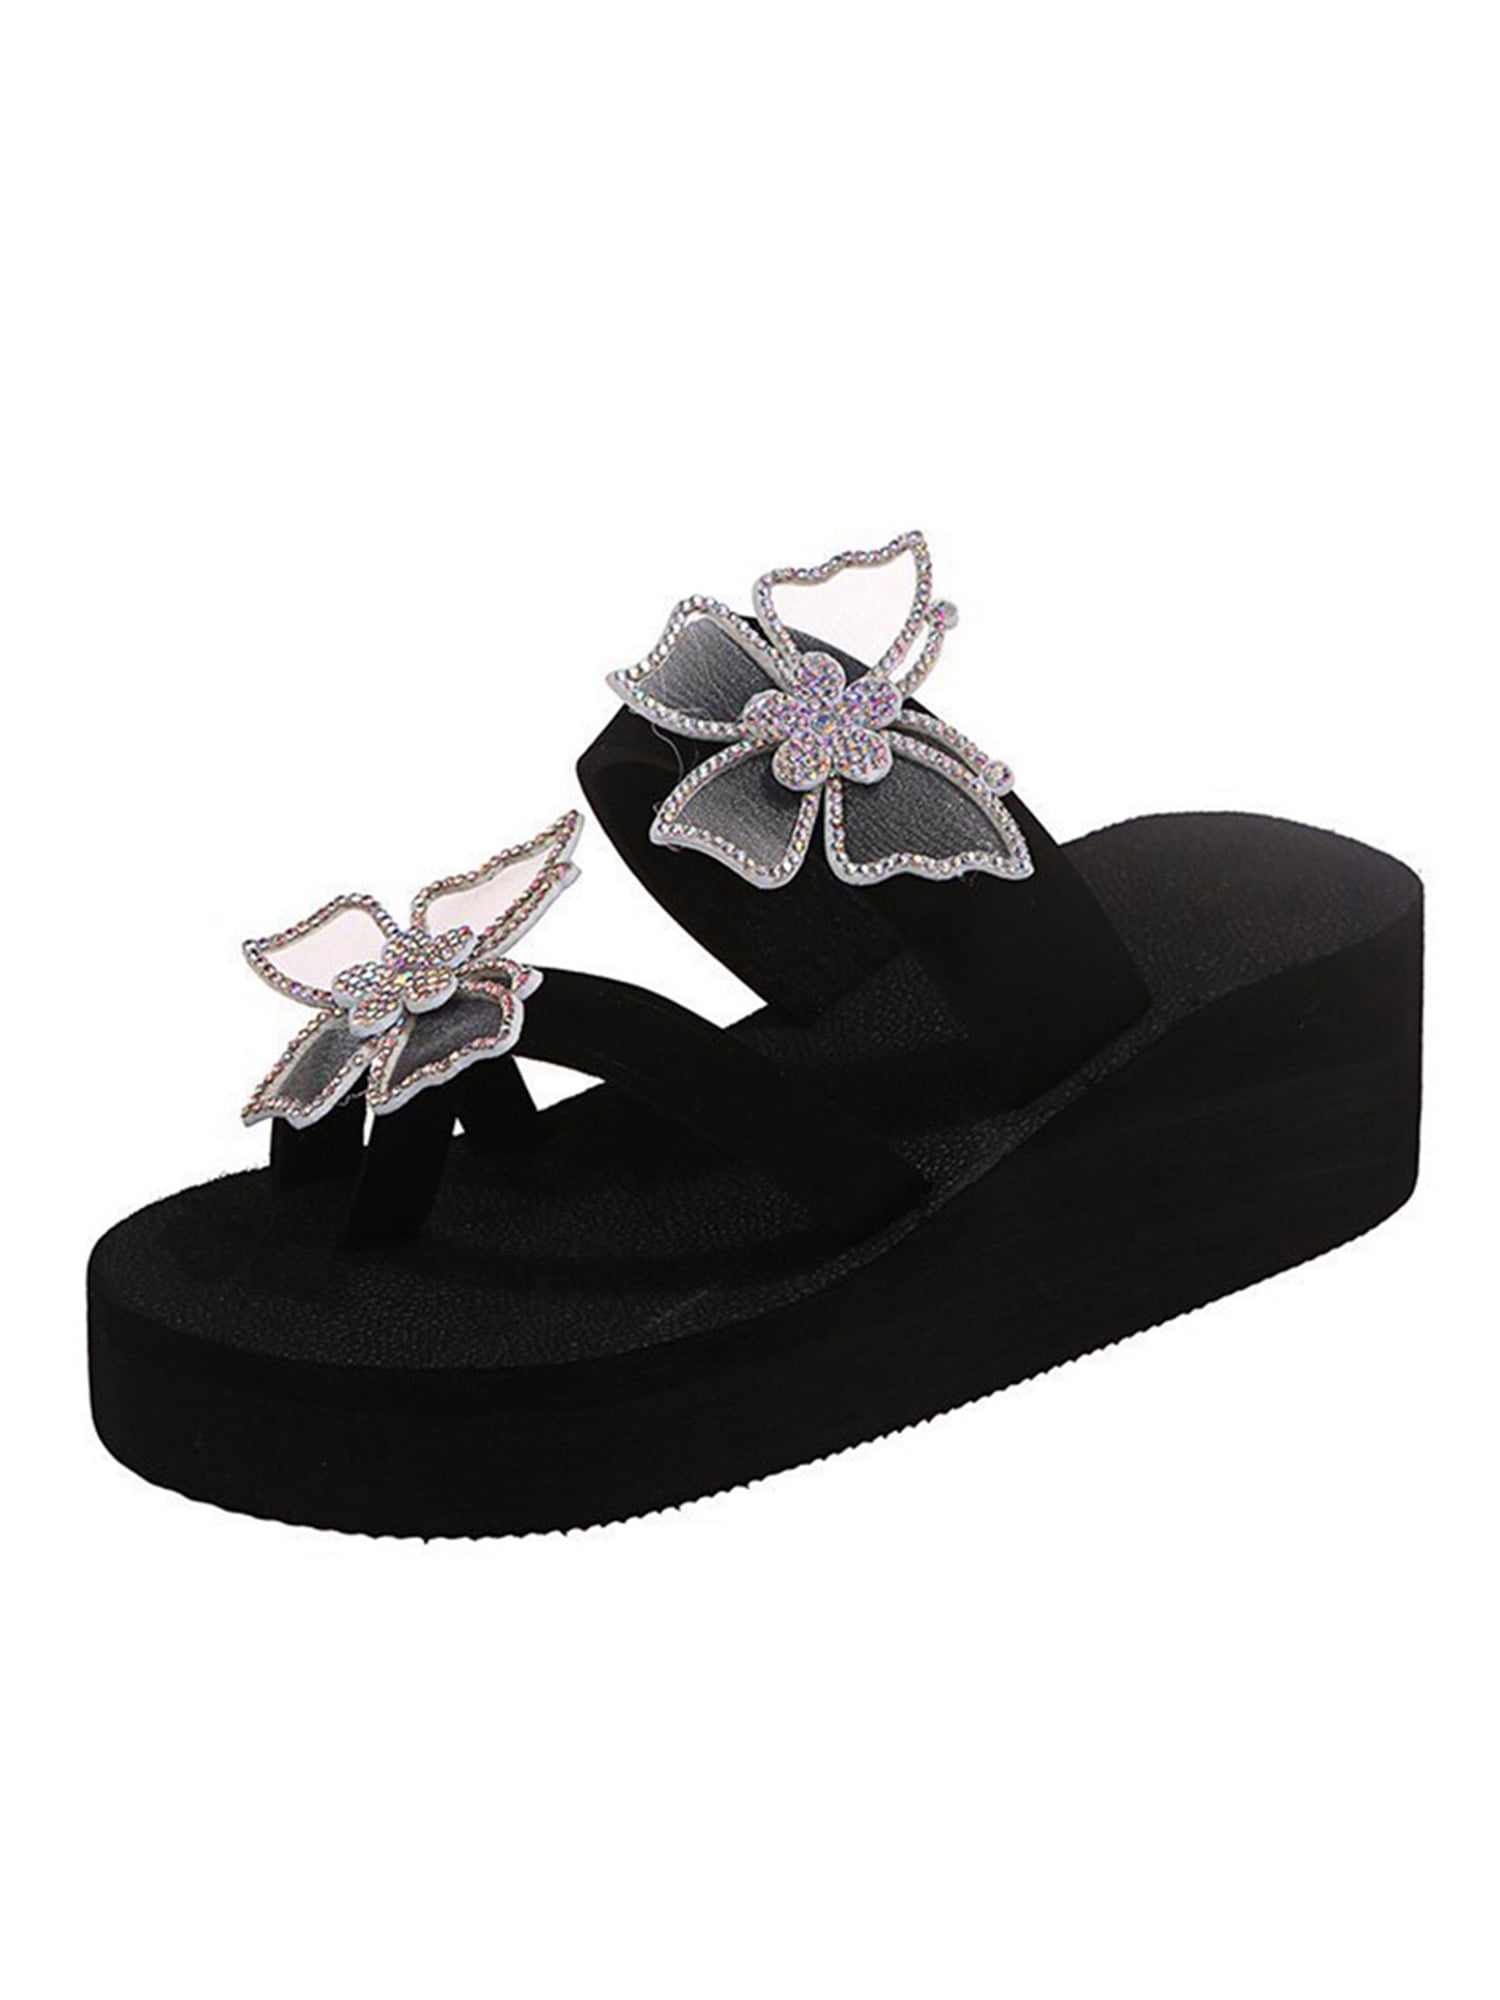 Womens Slip On Sliders Ladies Flat Sparkly Diamante Bling Summer Sandals Shoes 